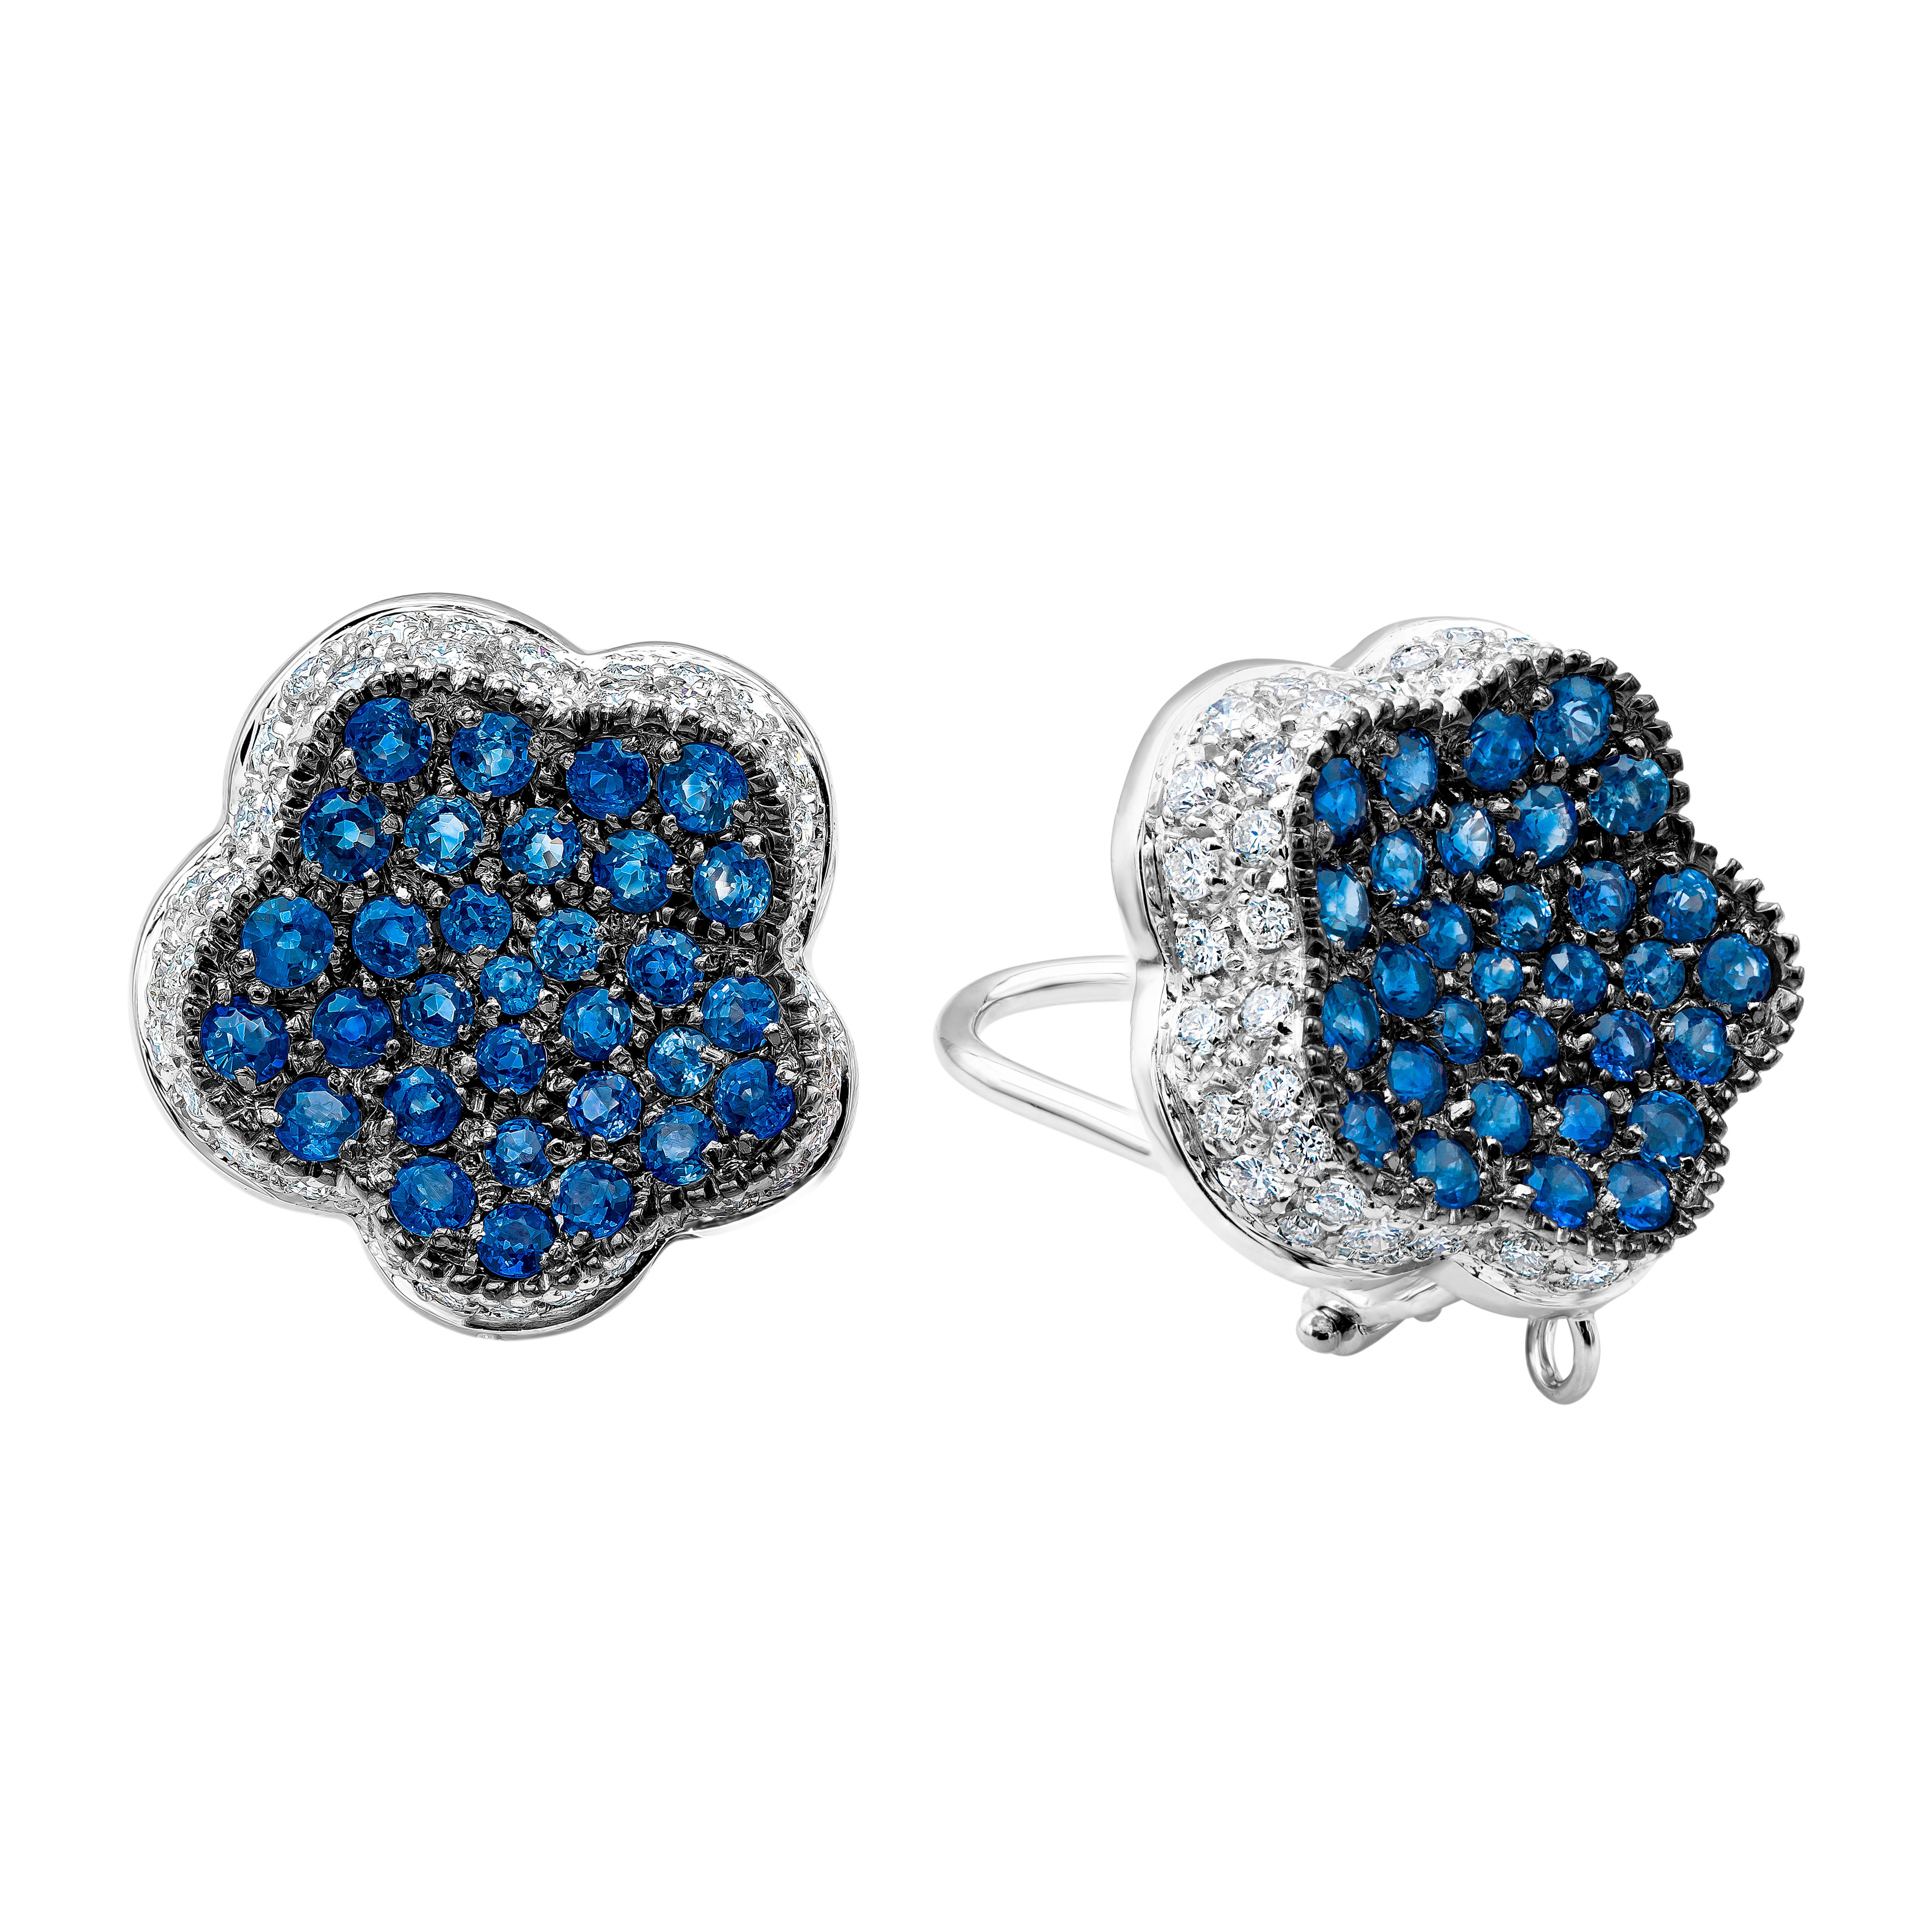 A unique pair of clip-on design earrings showcasing color-rich round blue sapphires, micro-pave set in 18k white gold. Finished with round brilliant diamonds around the blue sapphires set like floral motif earrings. Sapphires weigh 2.60 carats